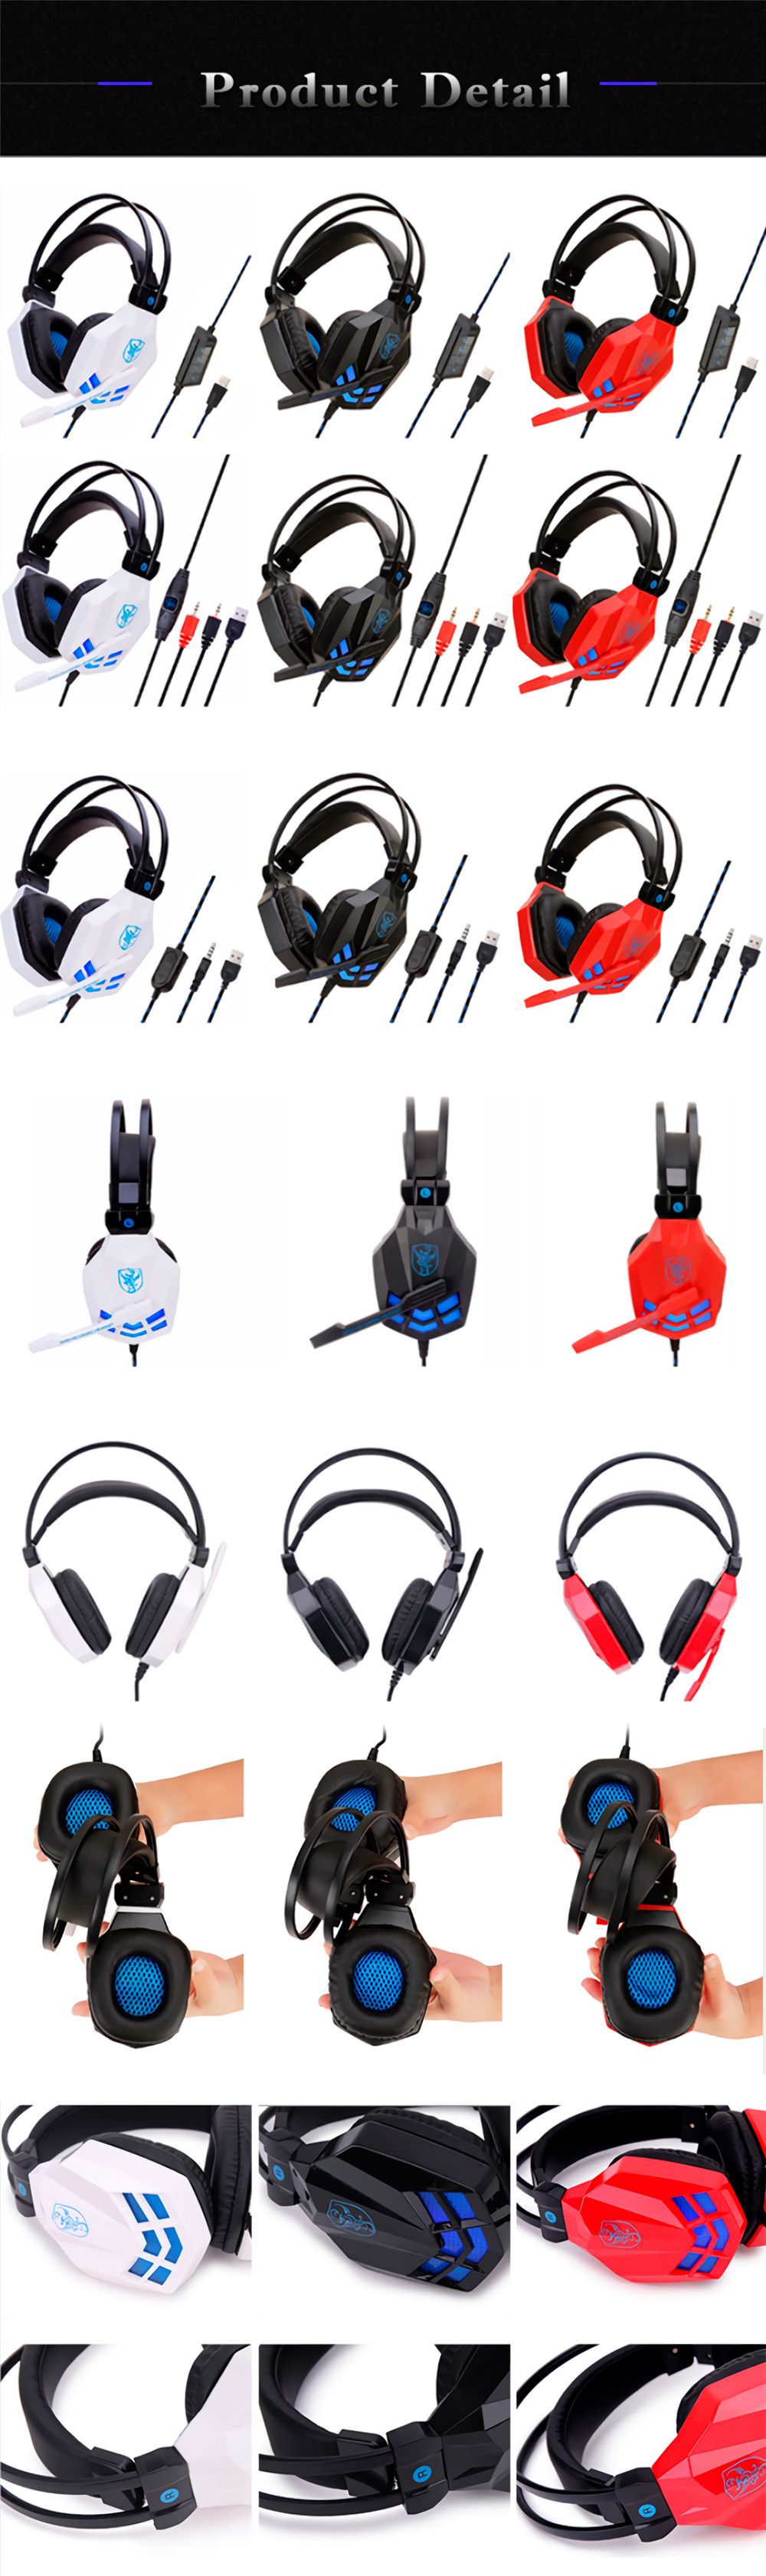 Soyto-SY850-Game-Headphone-35mm-USB-Wired-Bass-Gaming-Headset-Stereo-Earphone-Headphones-with-Mic-fo-1695961